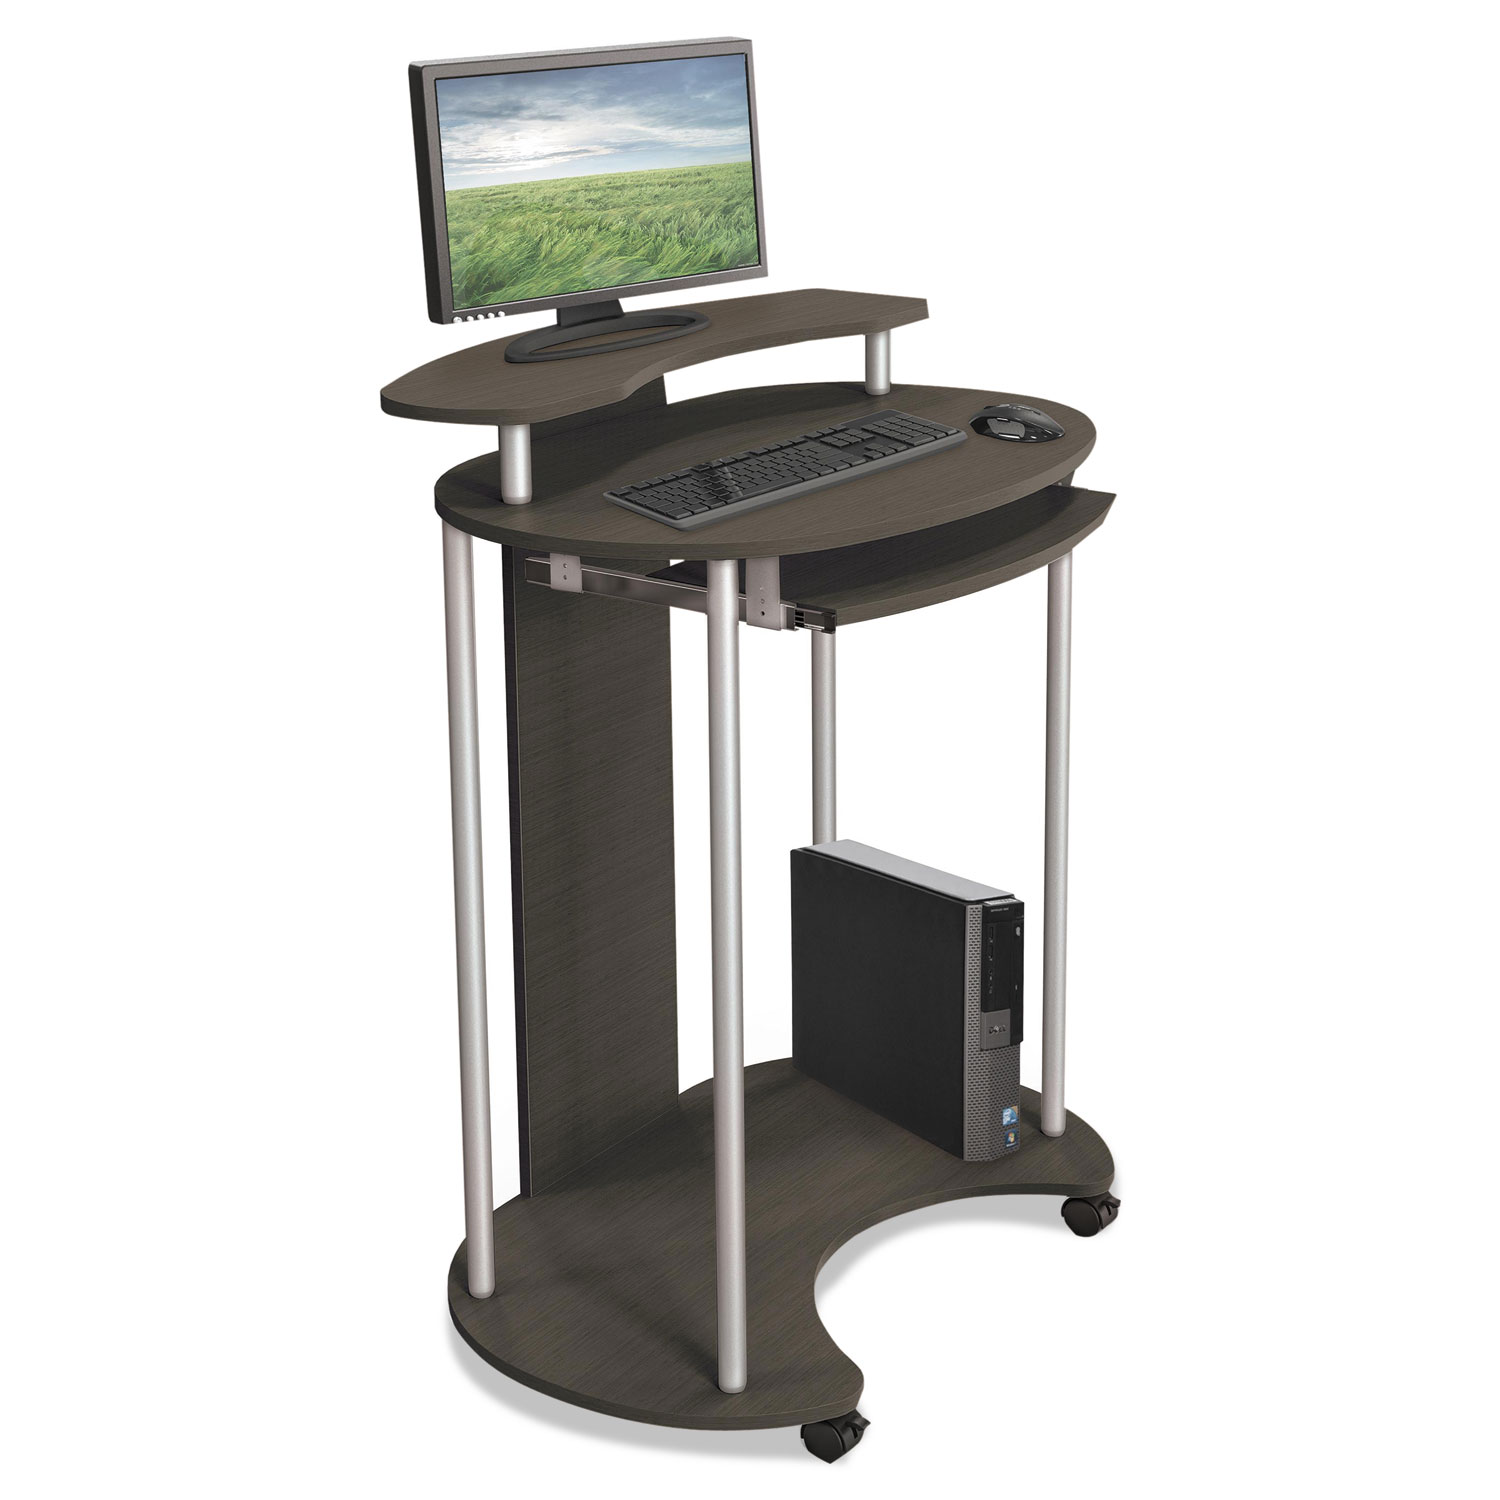 Up-Rite Mobile Standing Workstation, 27 1/2 x 22 1/2 x 45 1/2, Smoked Sapelle